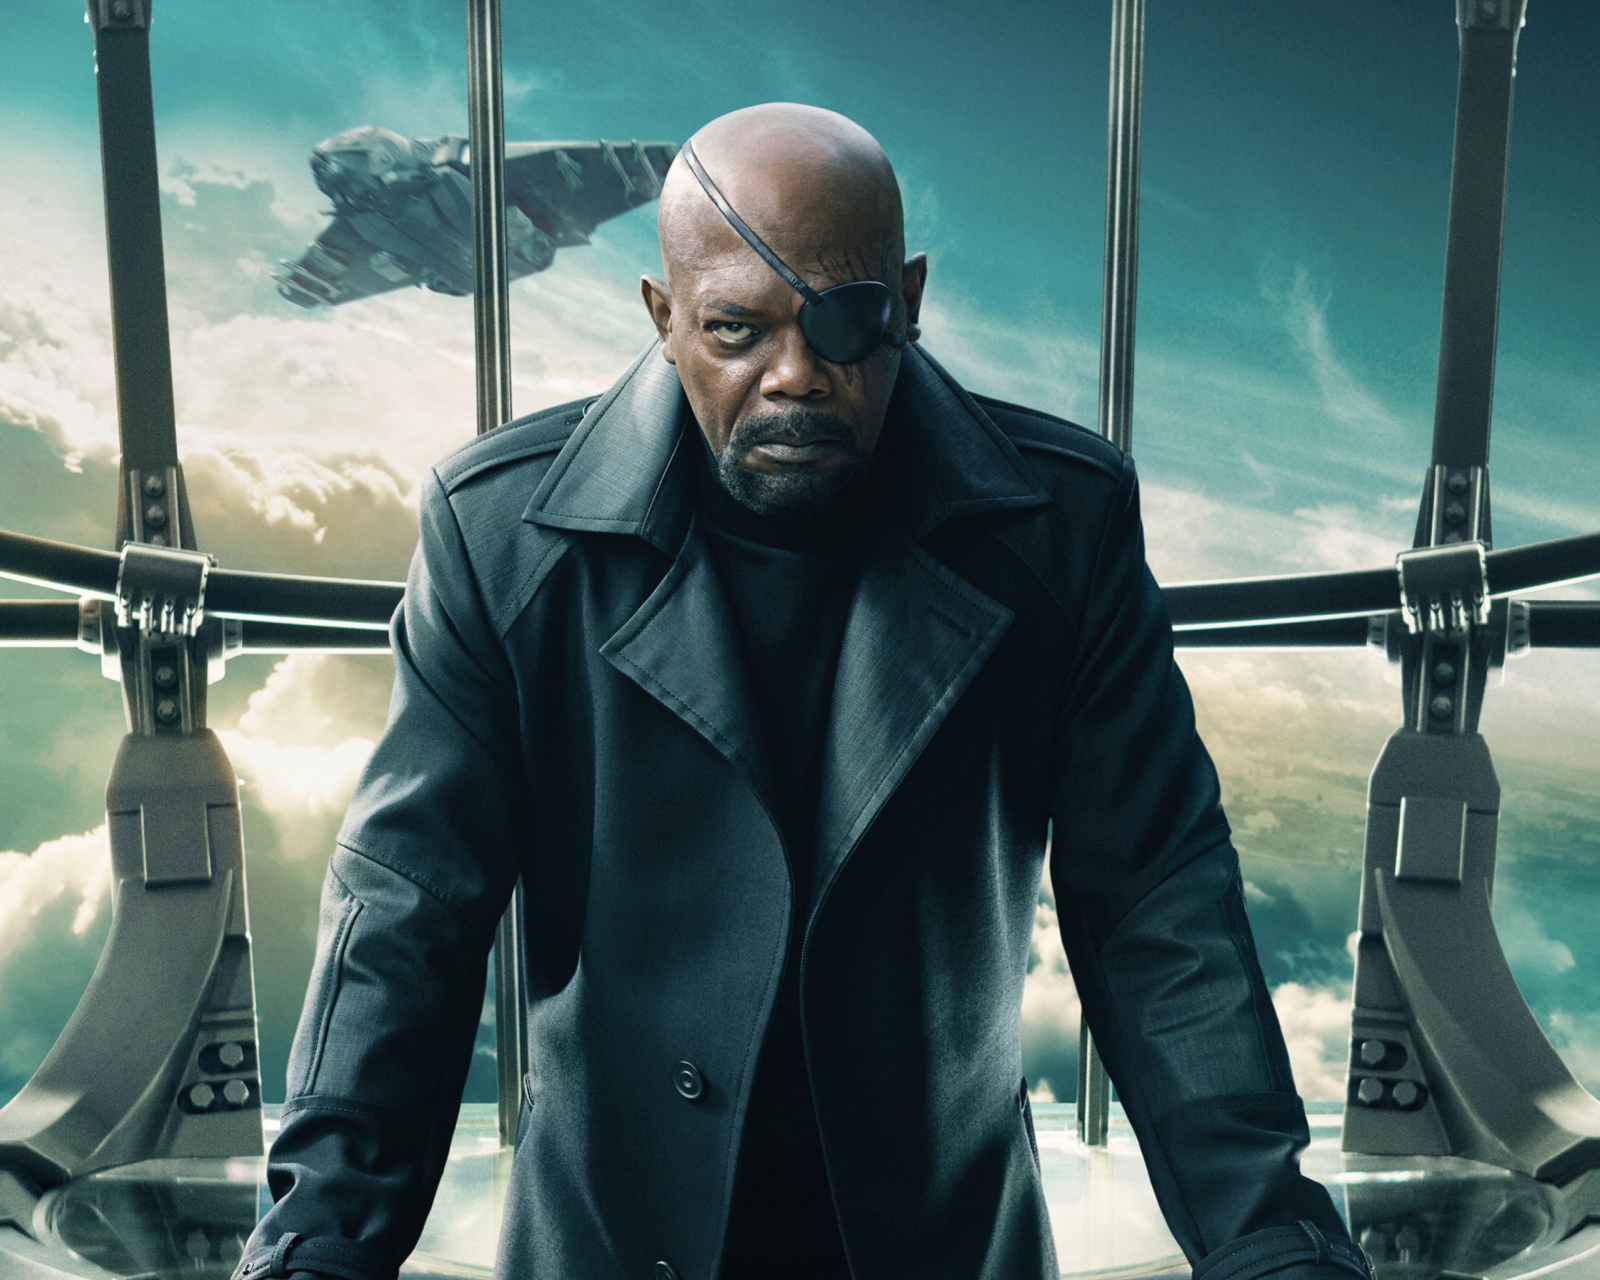 Nick Fury Captain America The Winter Soldier wallpaper 1600x1280